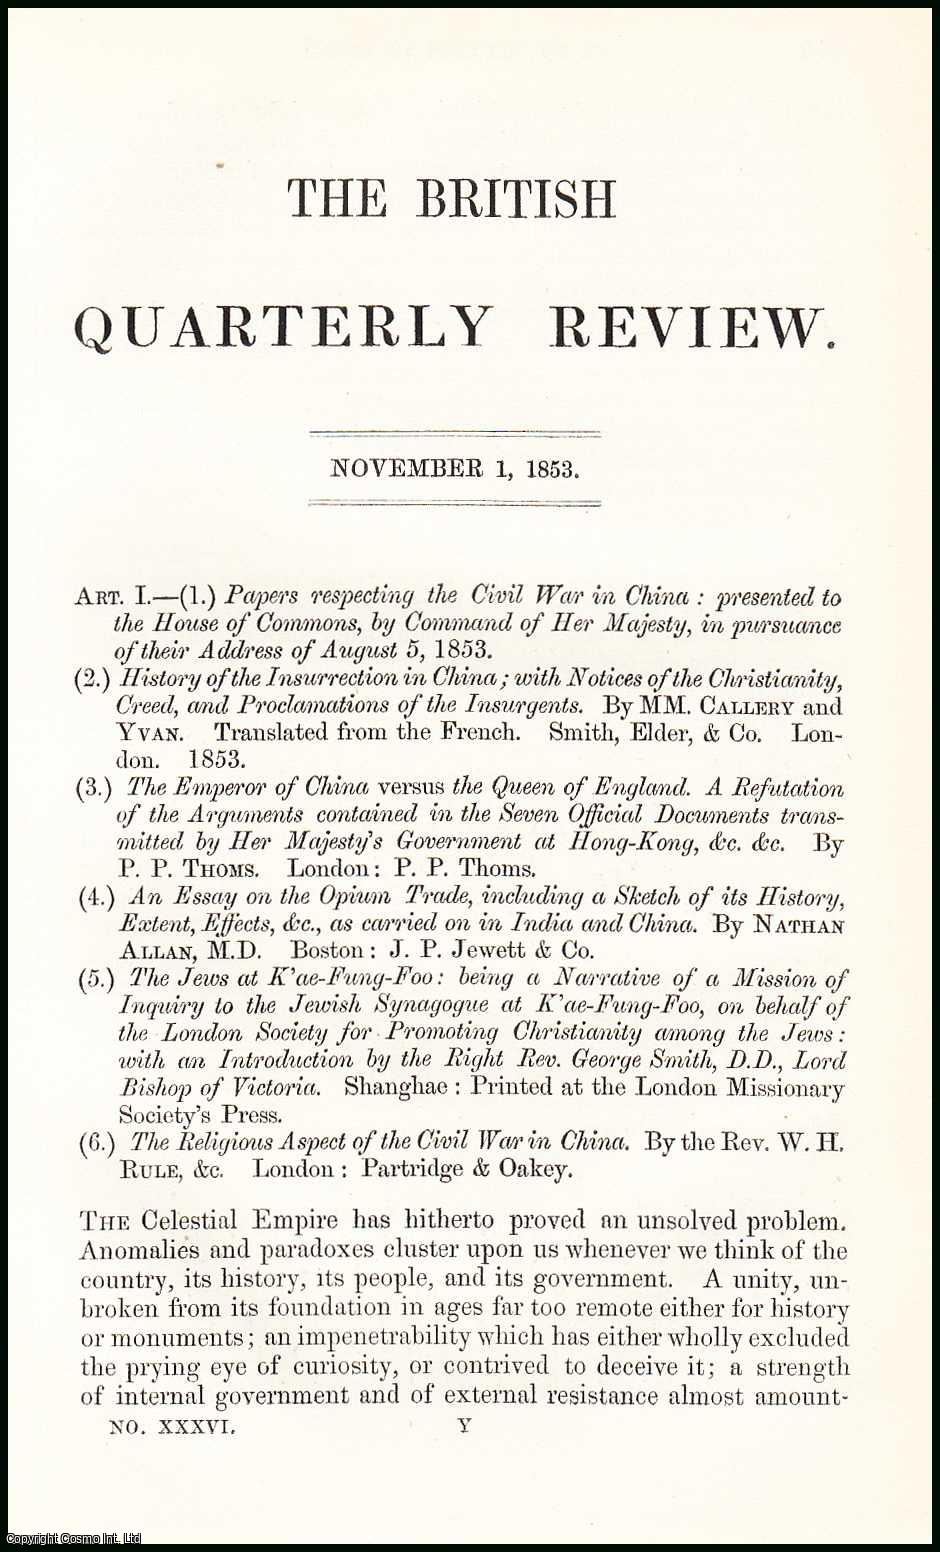 Author Unknown - The Revolution in China. A rare original article from the British Quarterly Review, 1853.